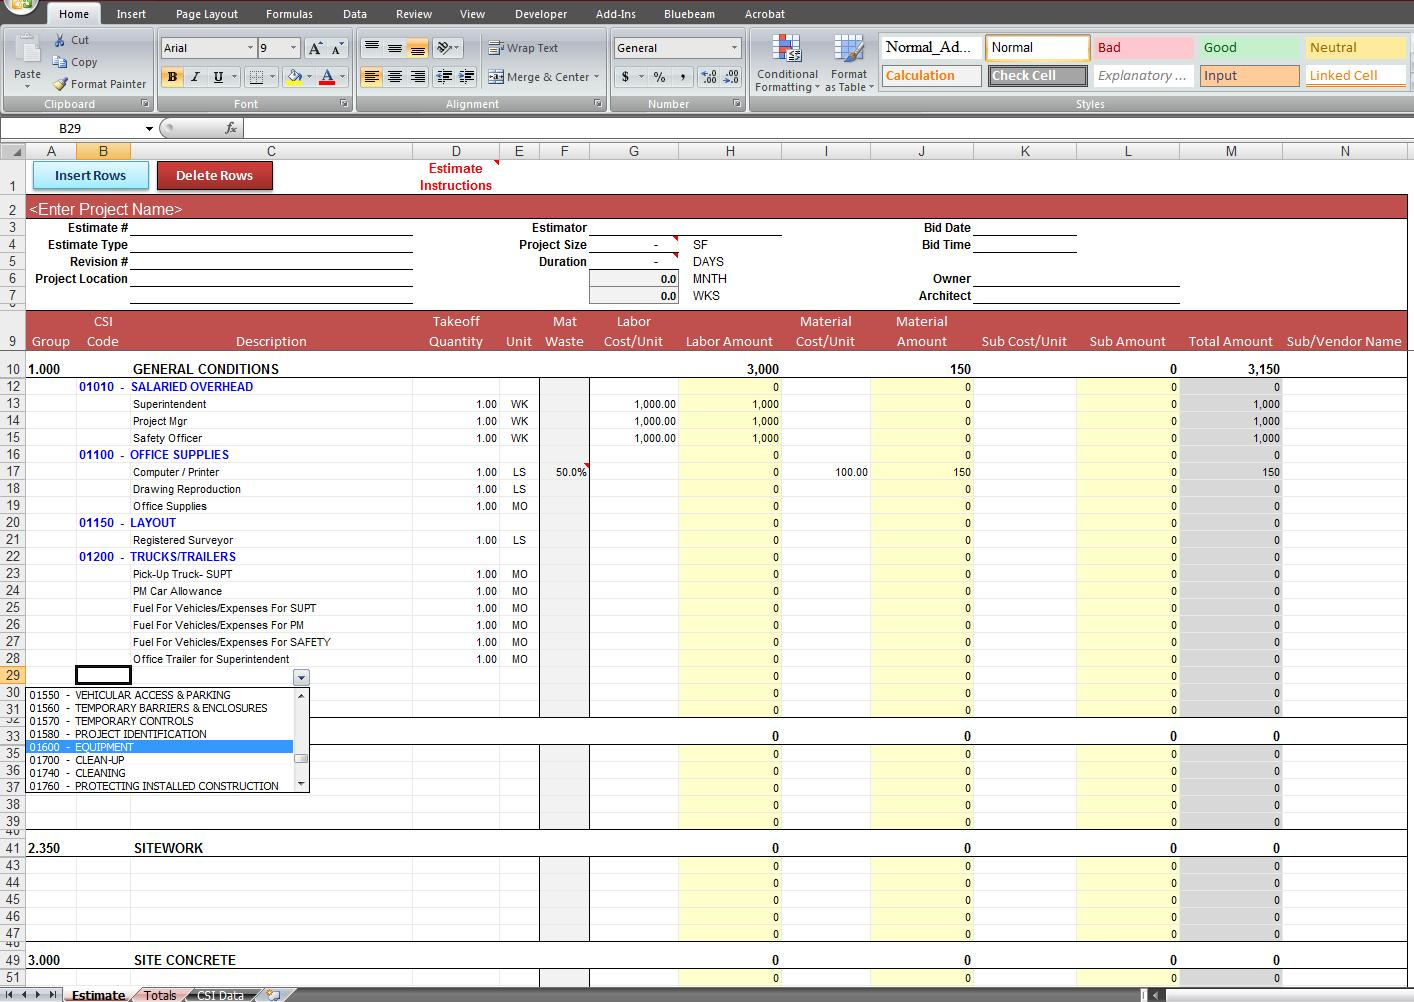 Building Construction Estimate Spreadsheet Excel Download On How To Intended For Building Construction Estimate Spreadsheet Excel Download